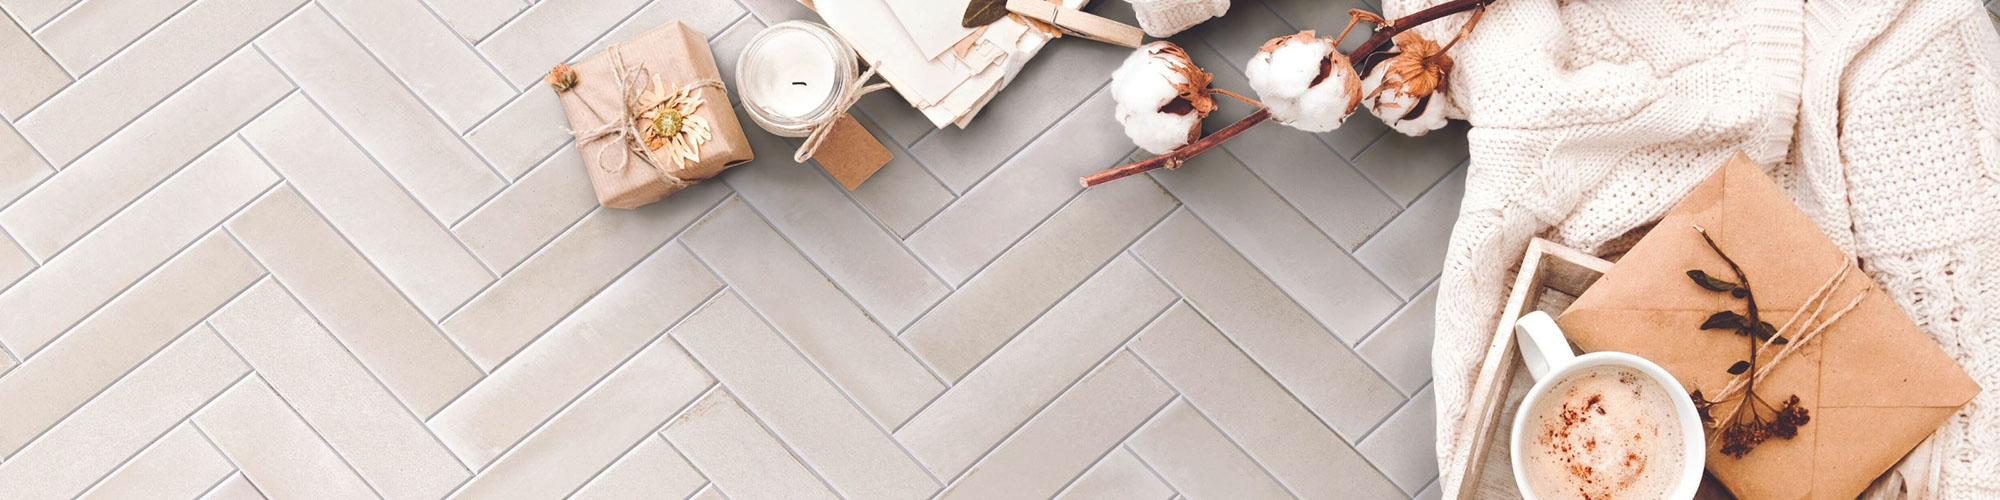 Closeup birds eye view of beige herringbone floor tile that looks like concrete, off-white sweater, latte in mug, stems of cotton bolls and candle wrapped in twine.